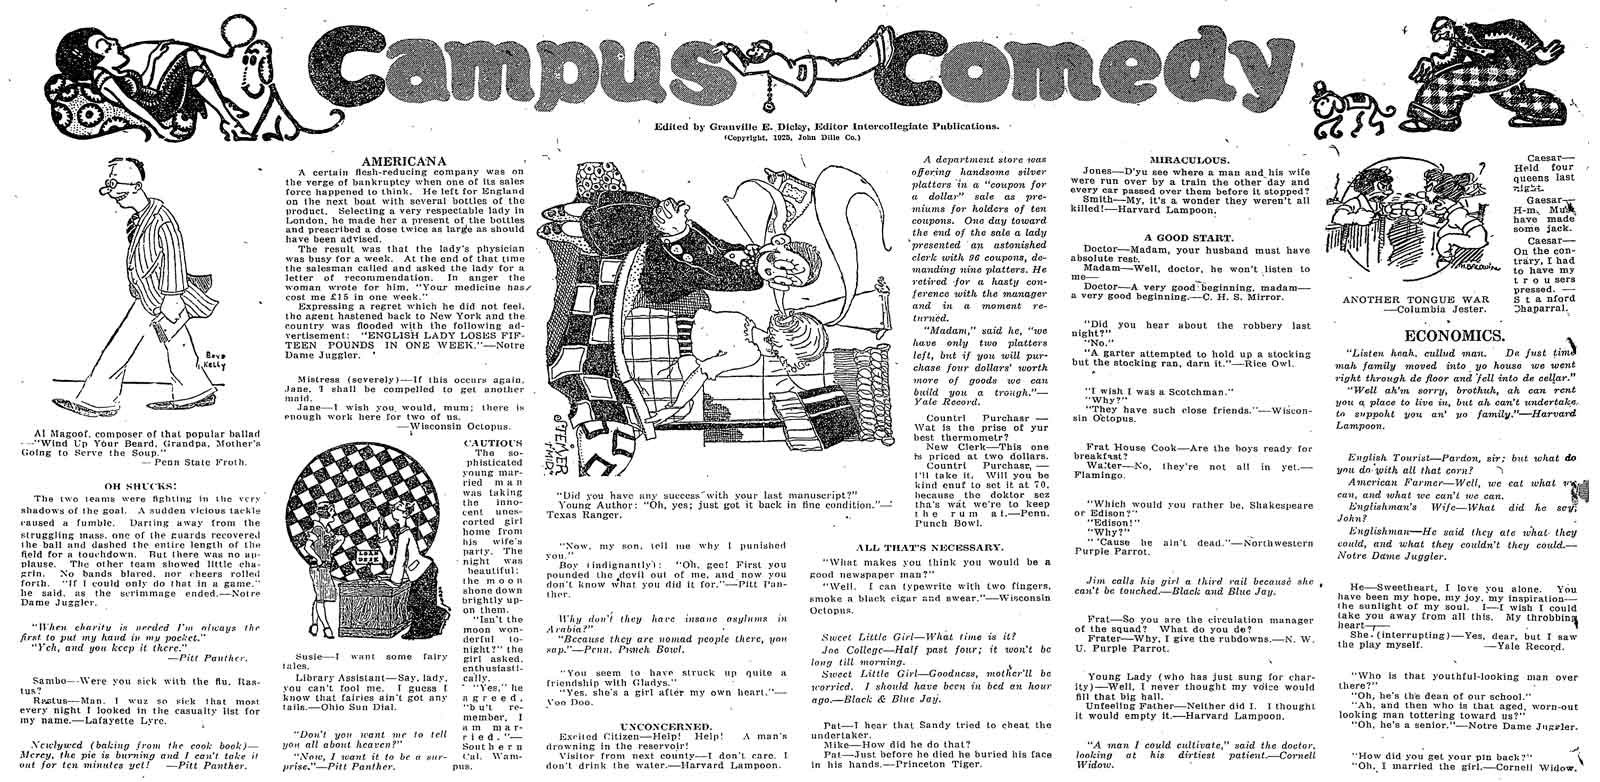 image campuscomedy251122-jpg